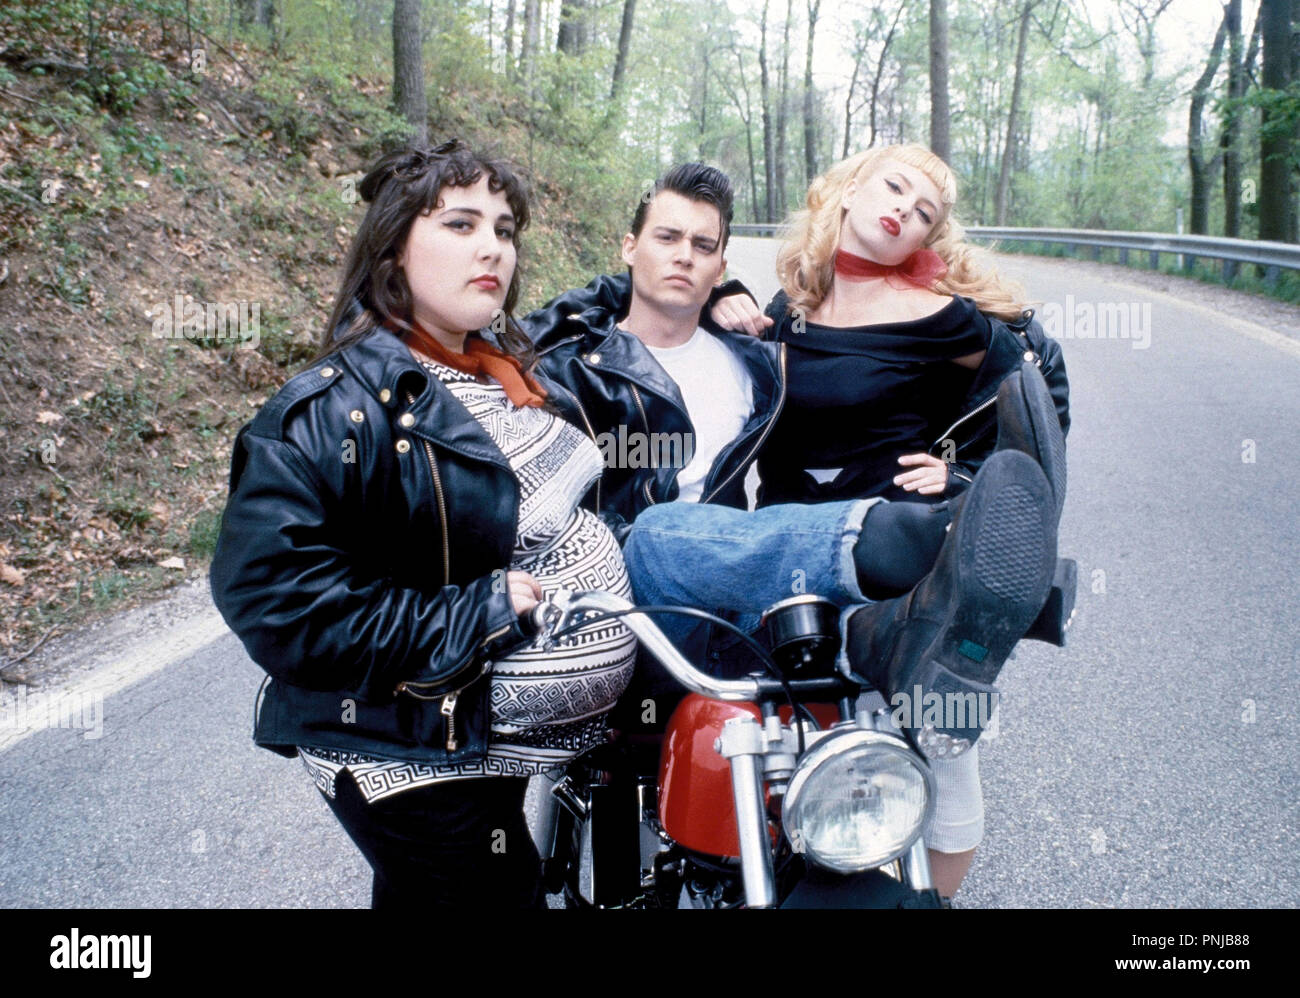 Original film title: CRY-BABY. English title: CRY-BABY. Year: 1990. Director: JOHN WATERS. Stars: JOHNNY DEPP; RICKI LAKE; TRACI LORDS. Credit: UNIVERSAL PICTURES / Album Stock Photo